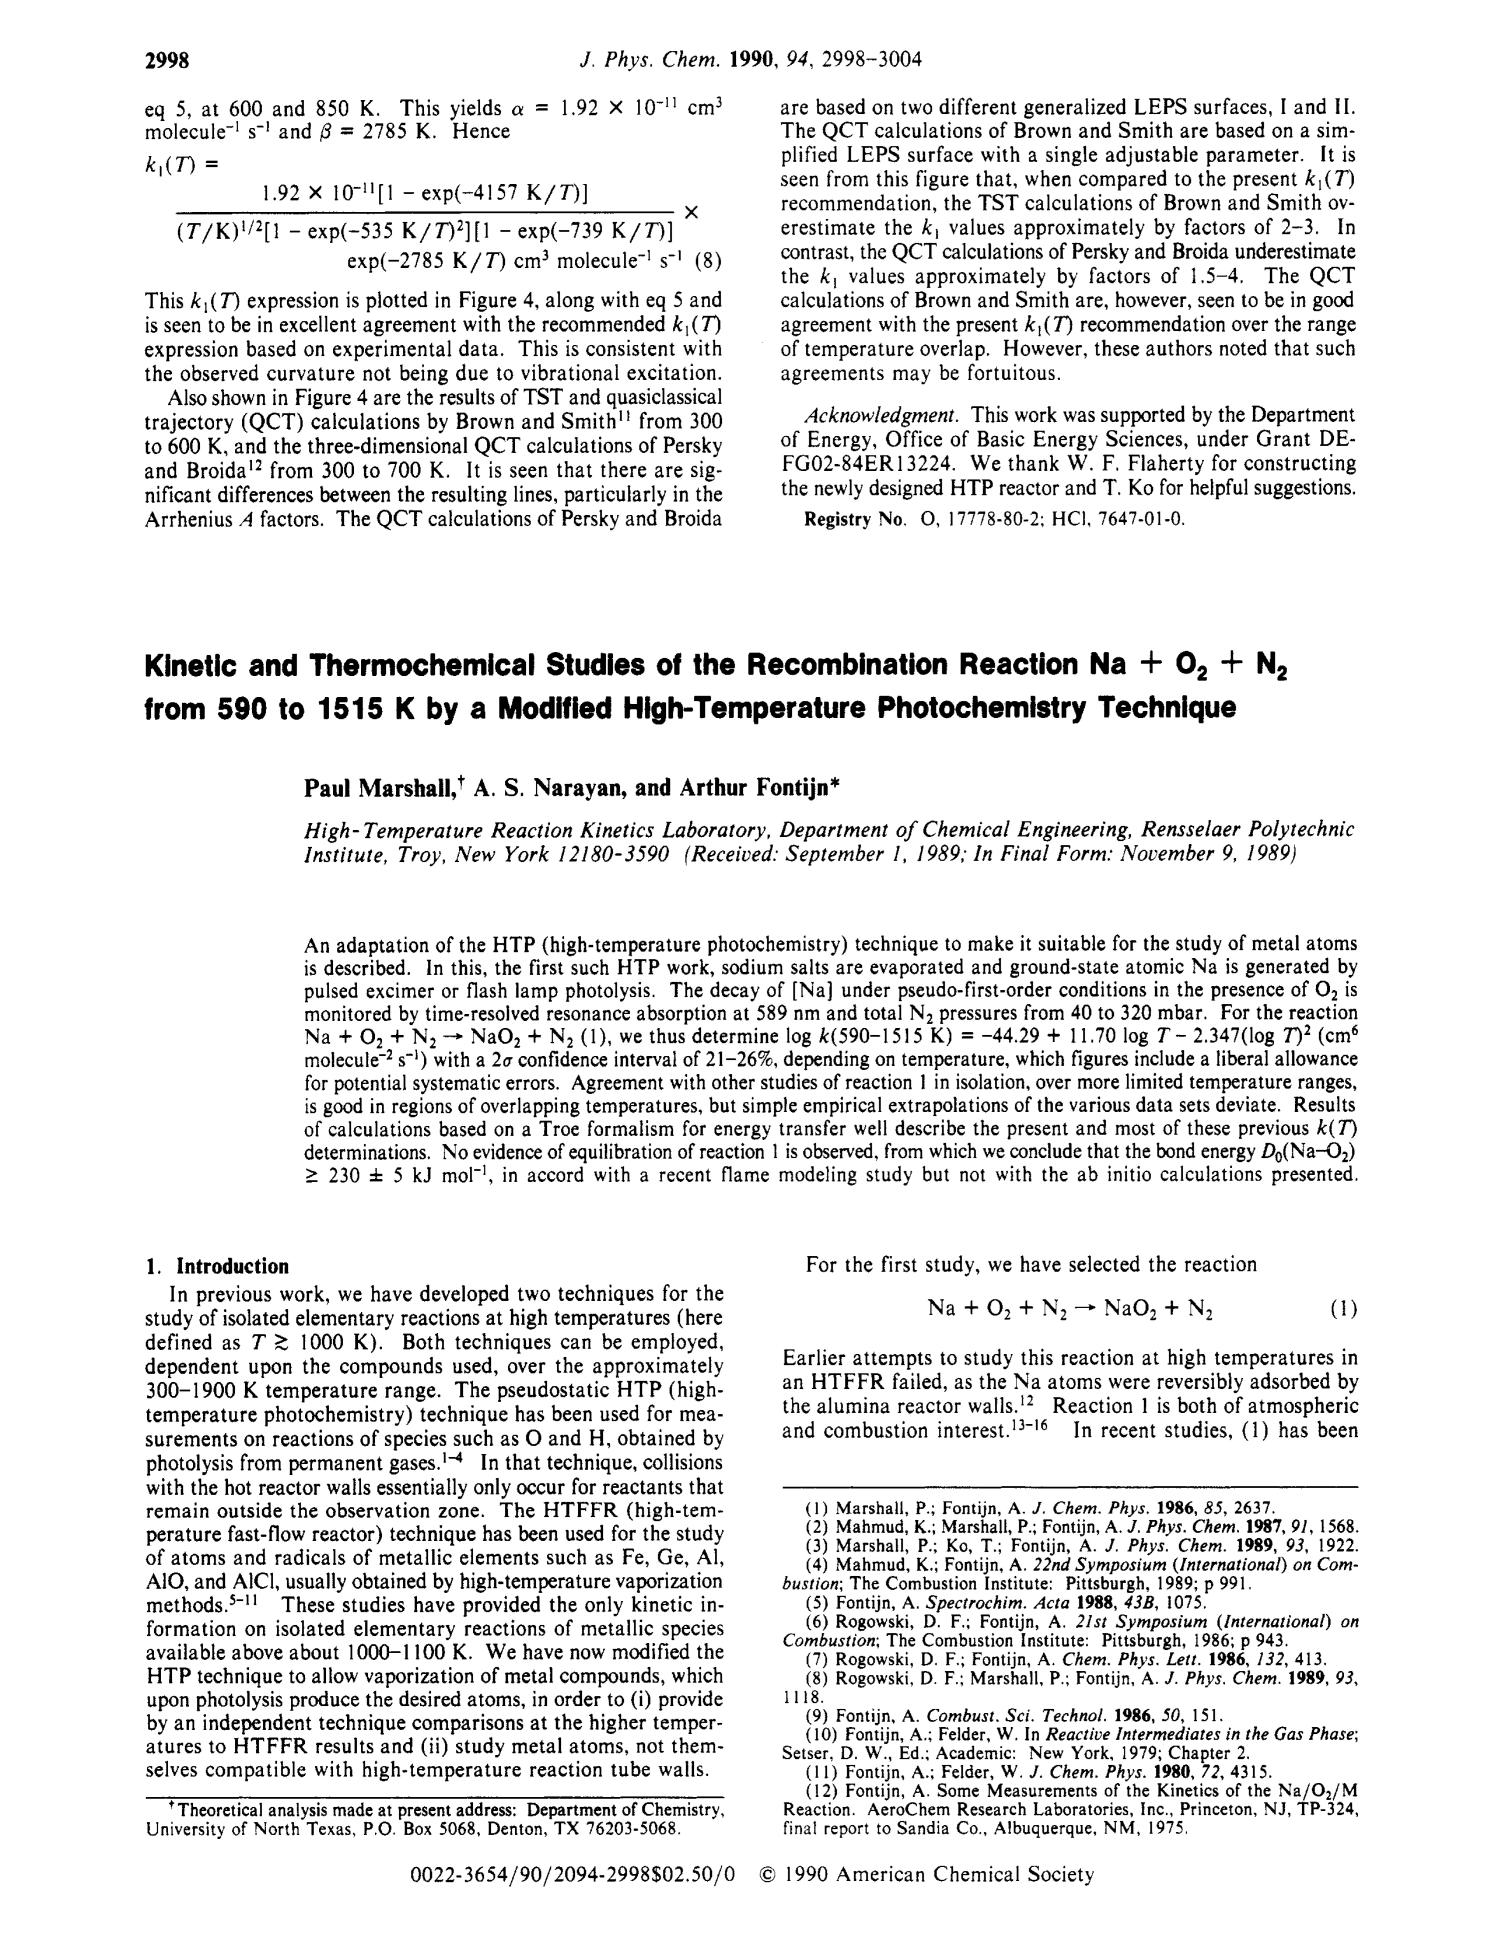 Kinetic And Thermochemical Studies Of The Recombination Reaction Na O N From 590 To 1515 K By A Modified High Temperature Photochemistry Technique Unt Digital Library